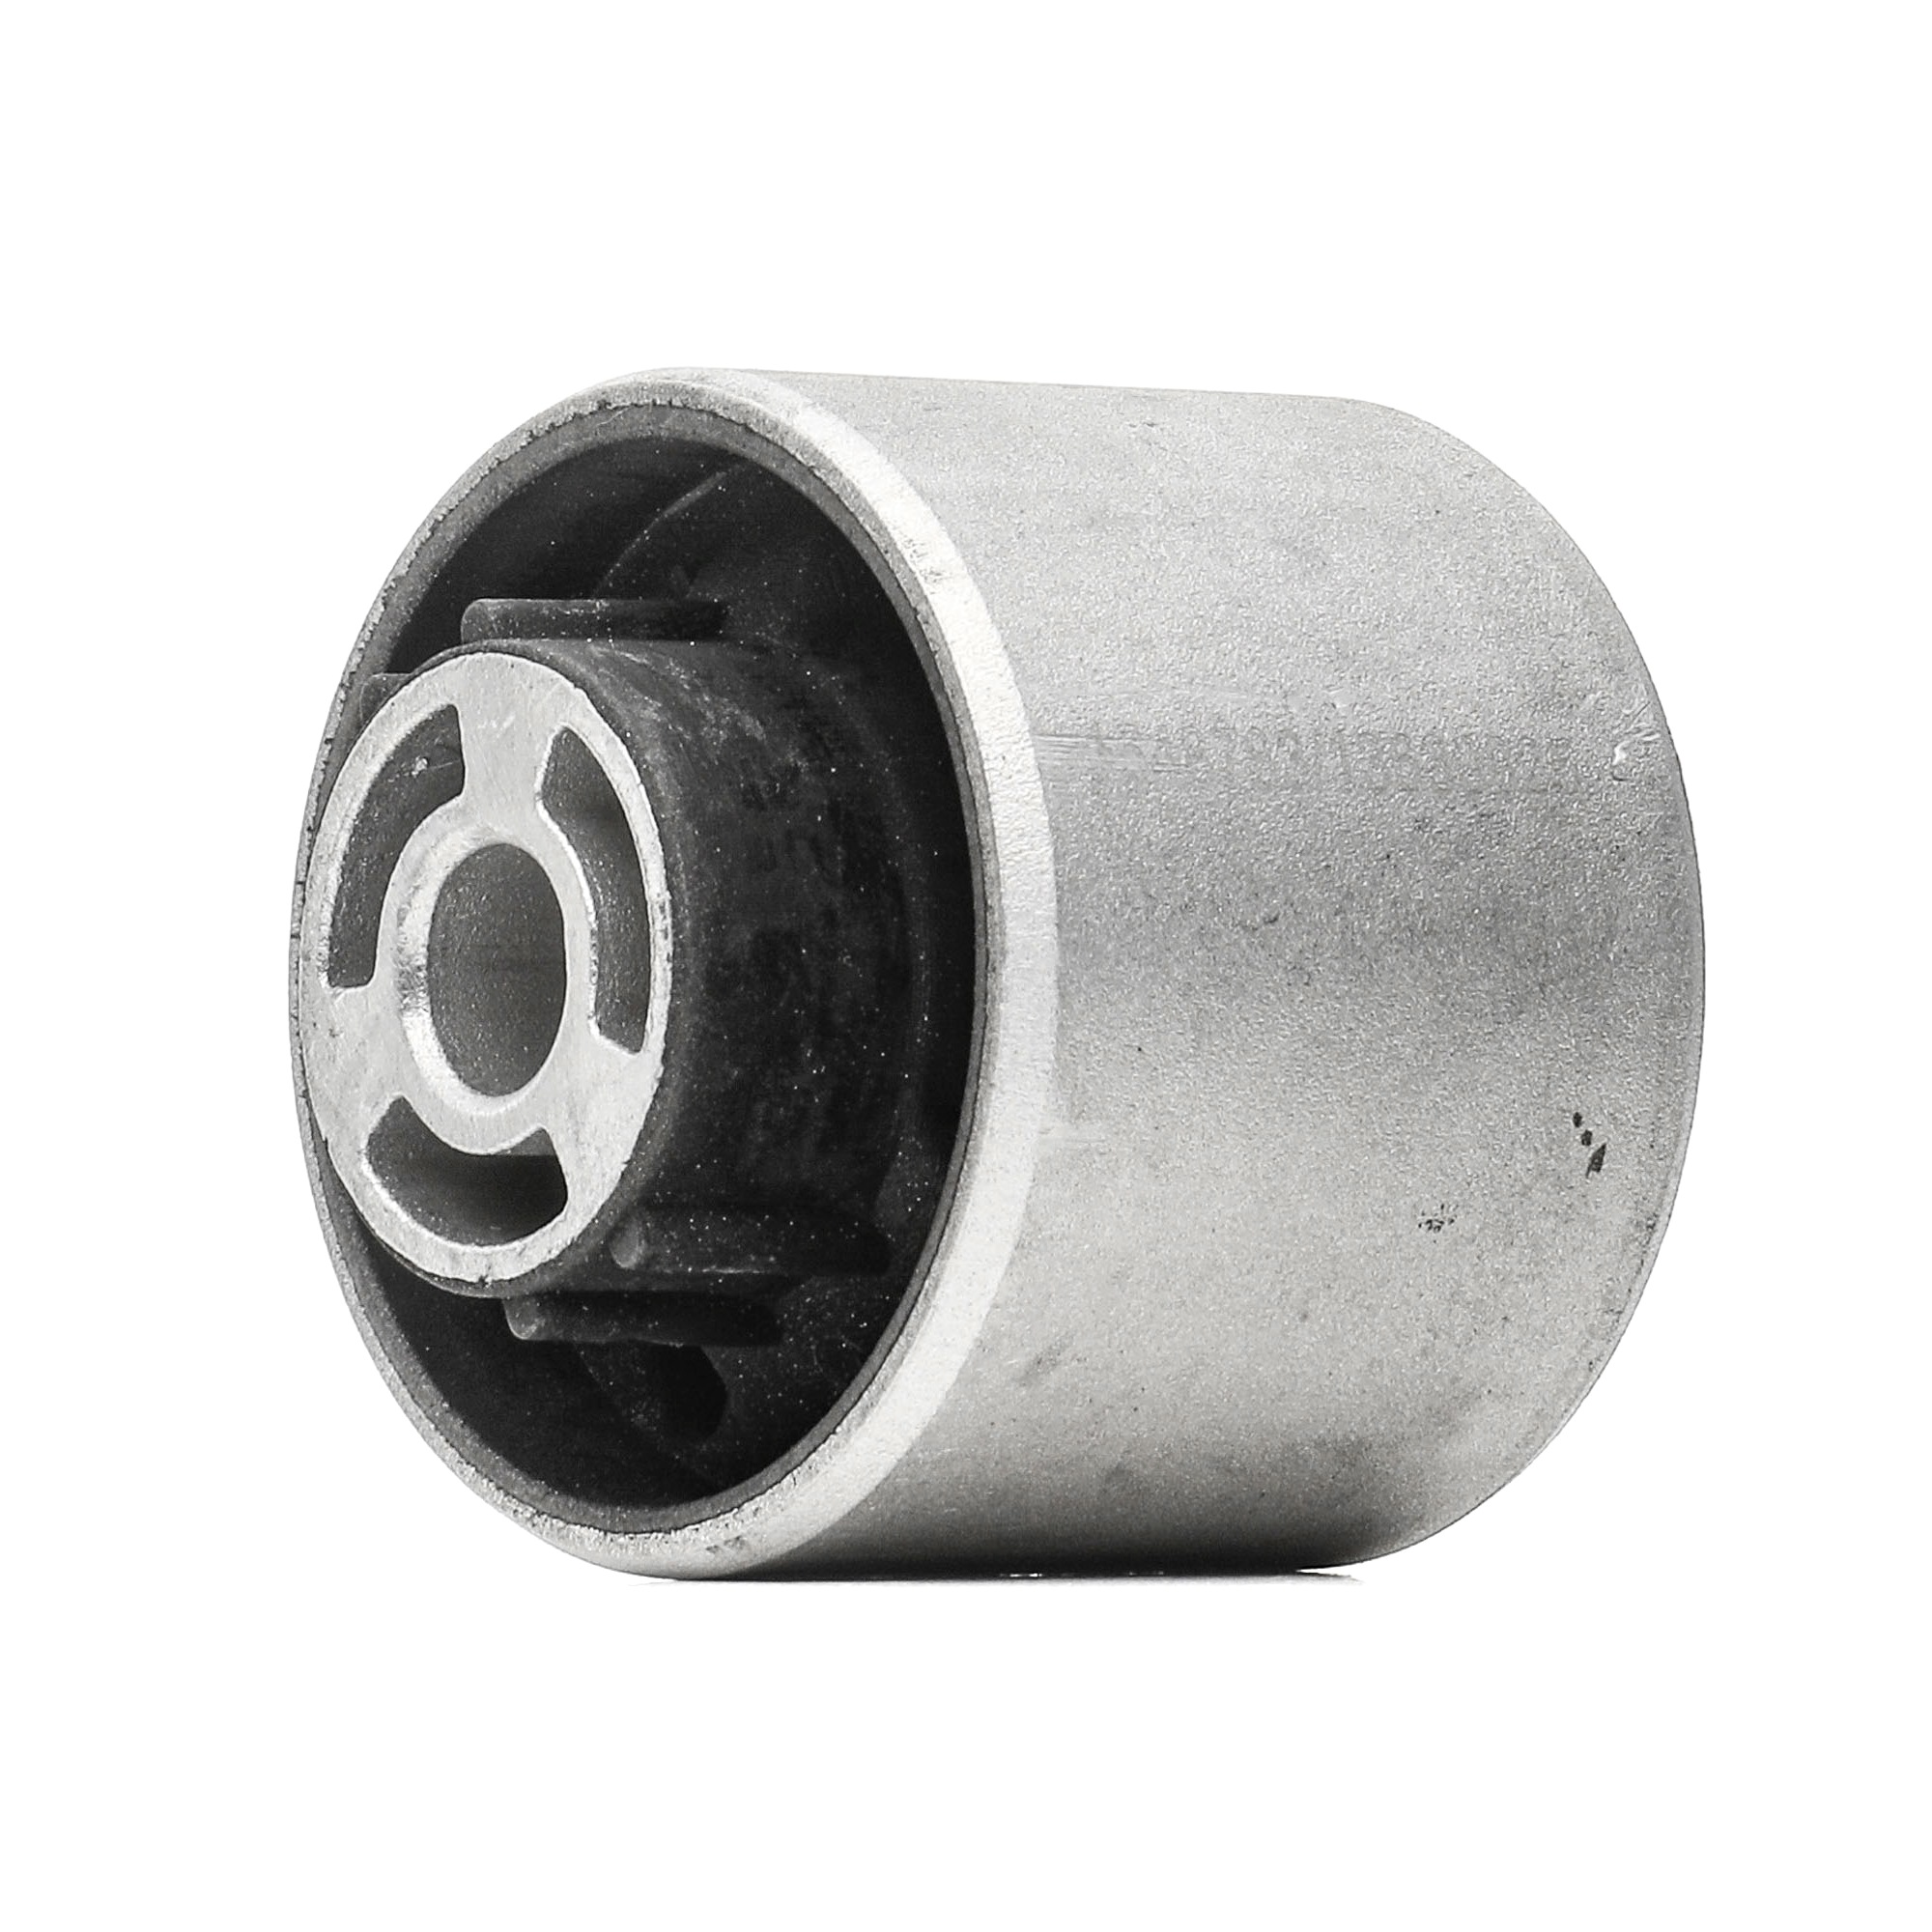 251T0053 RIDEX Suspension bushes SKODA without holder, Rear Axle Right, Rear Axle Left, for trailing arm